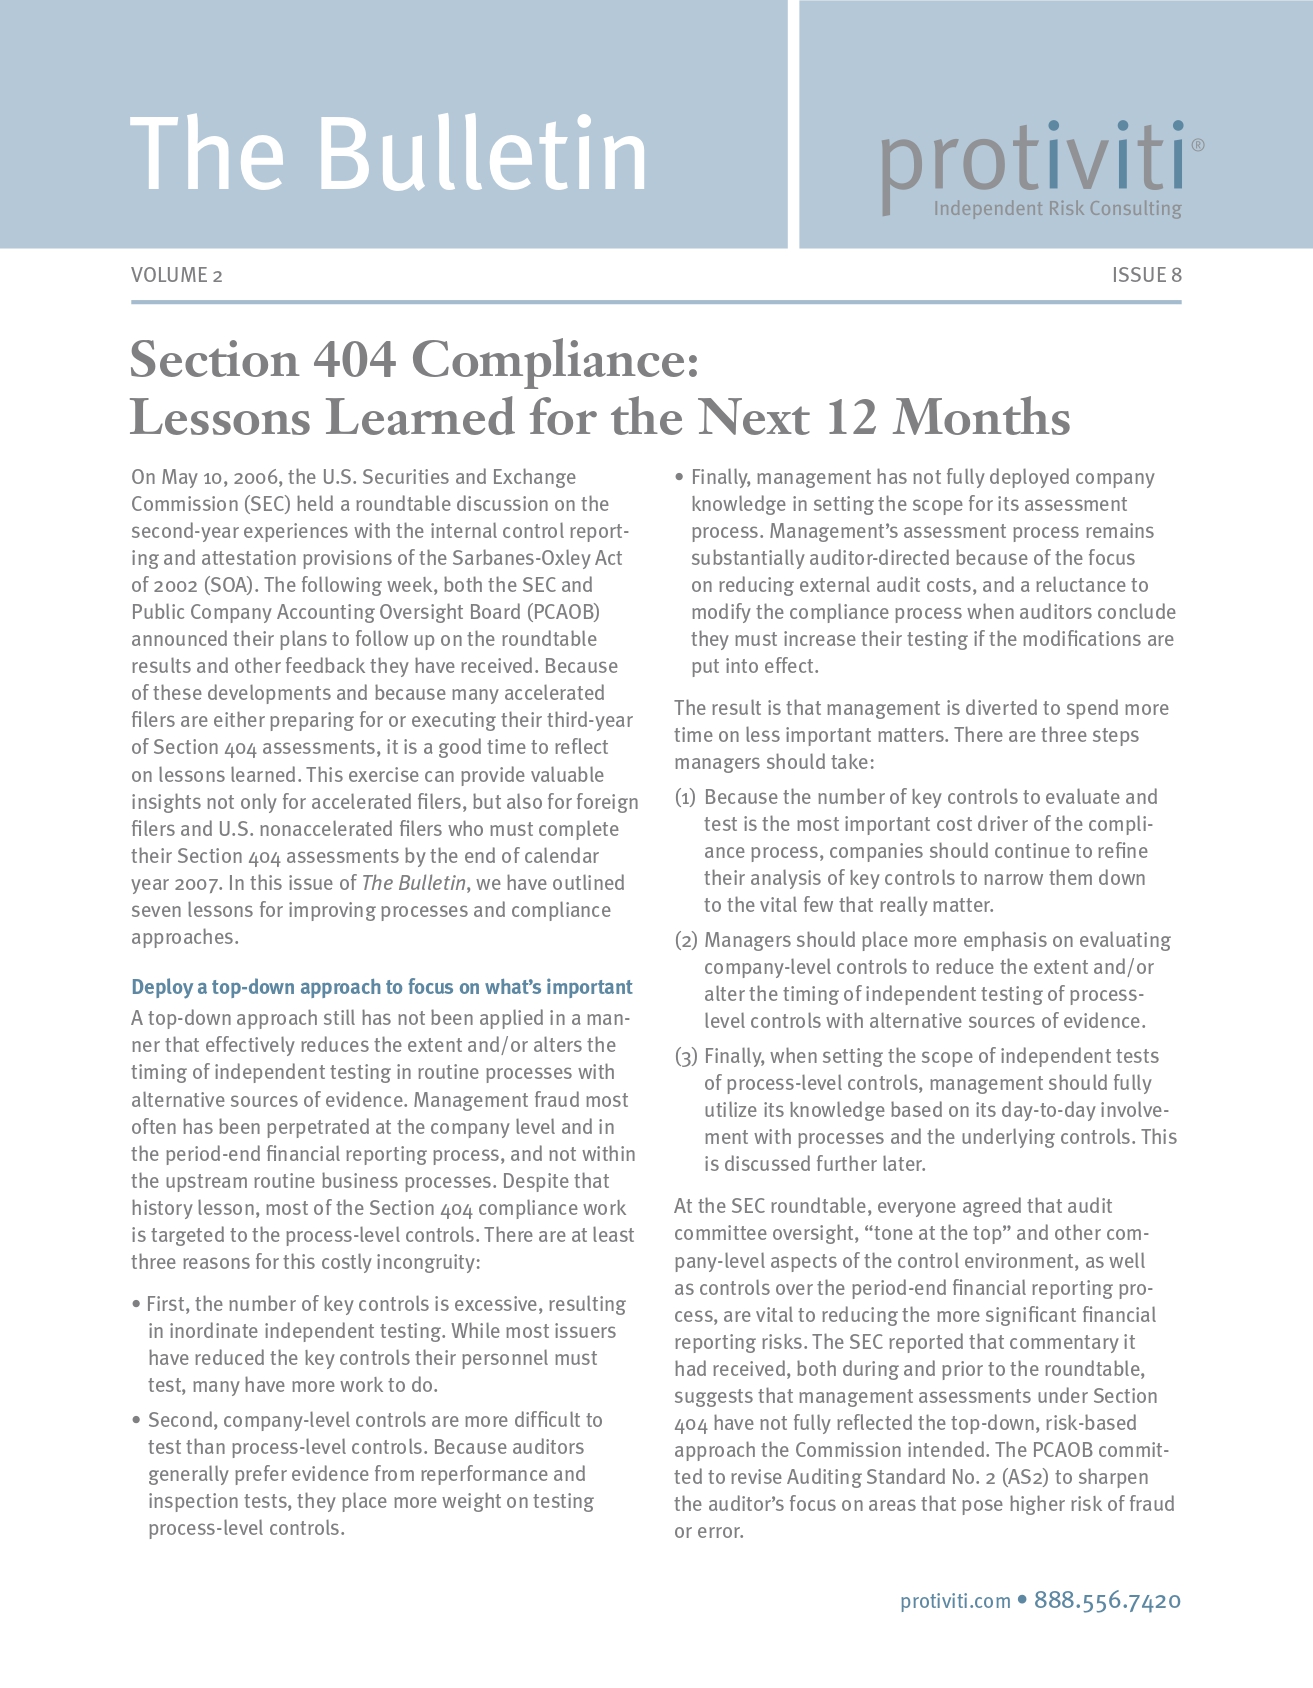 Screenshot of the first page of Section 404 Compliance: Lessons Learned for the Next 12 Months